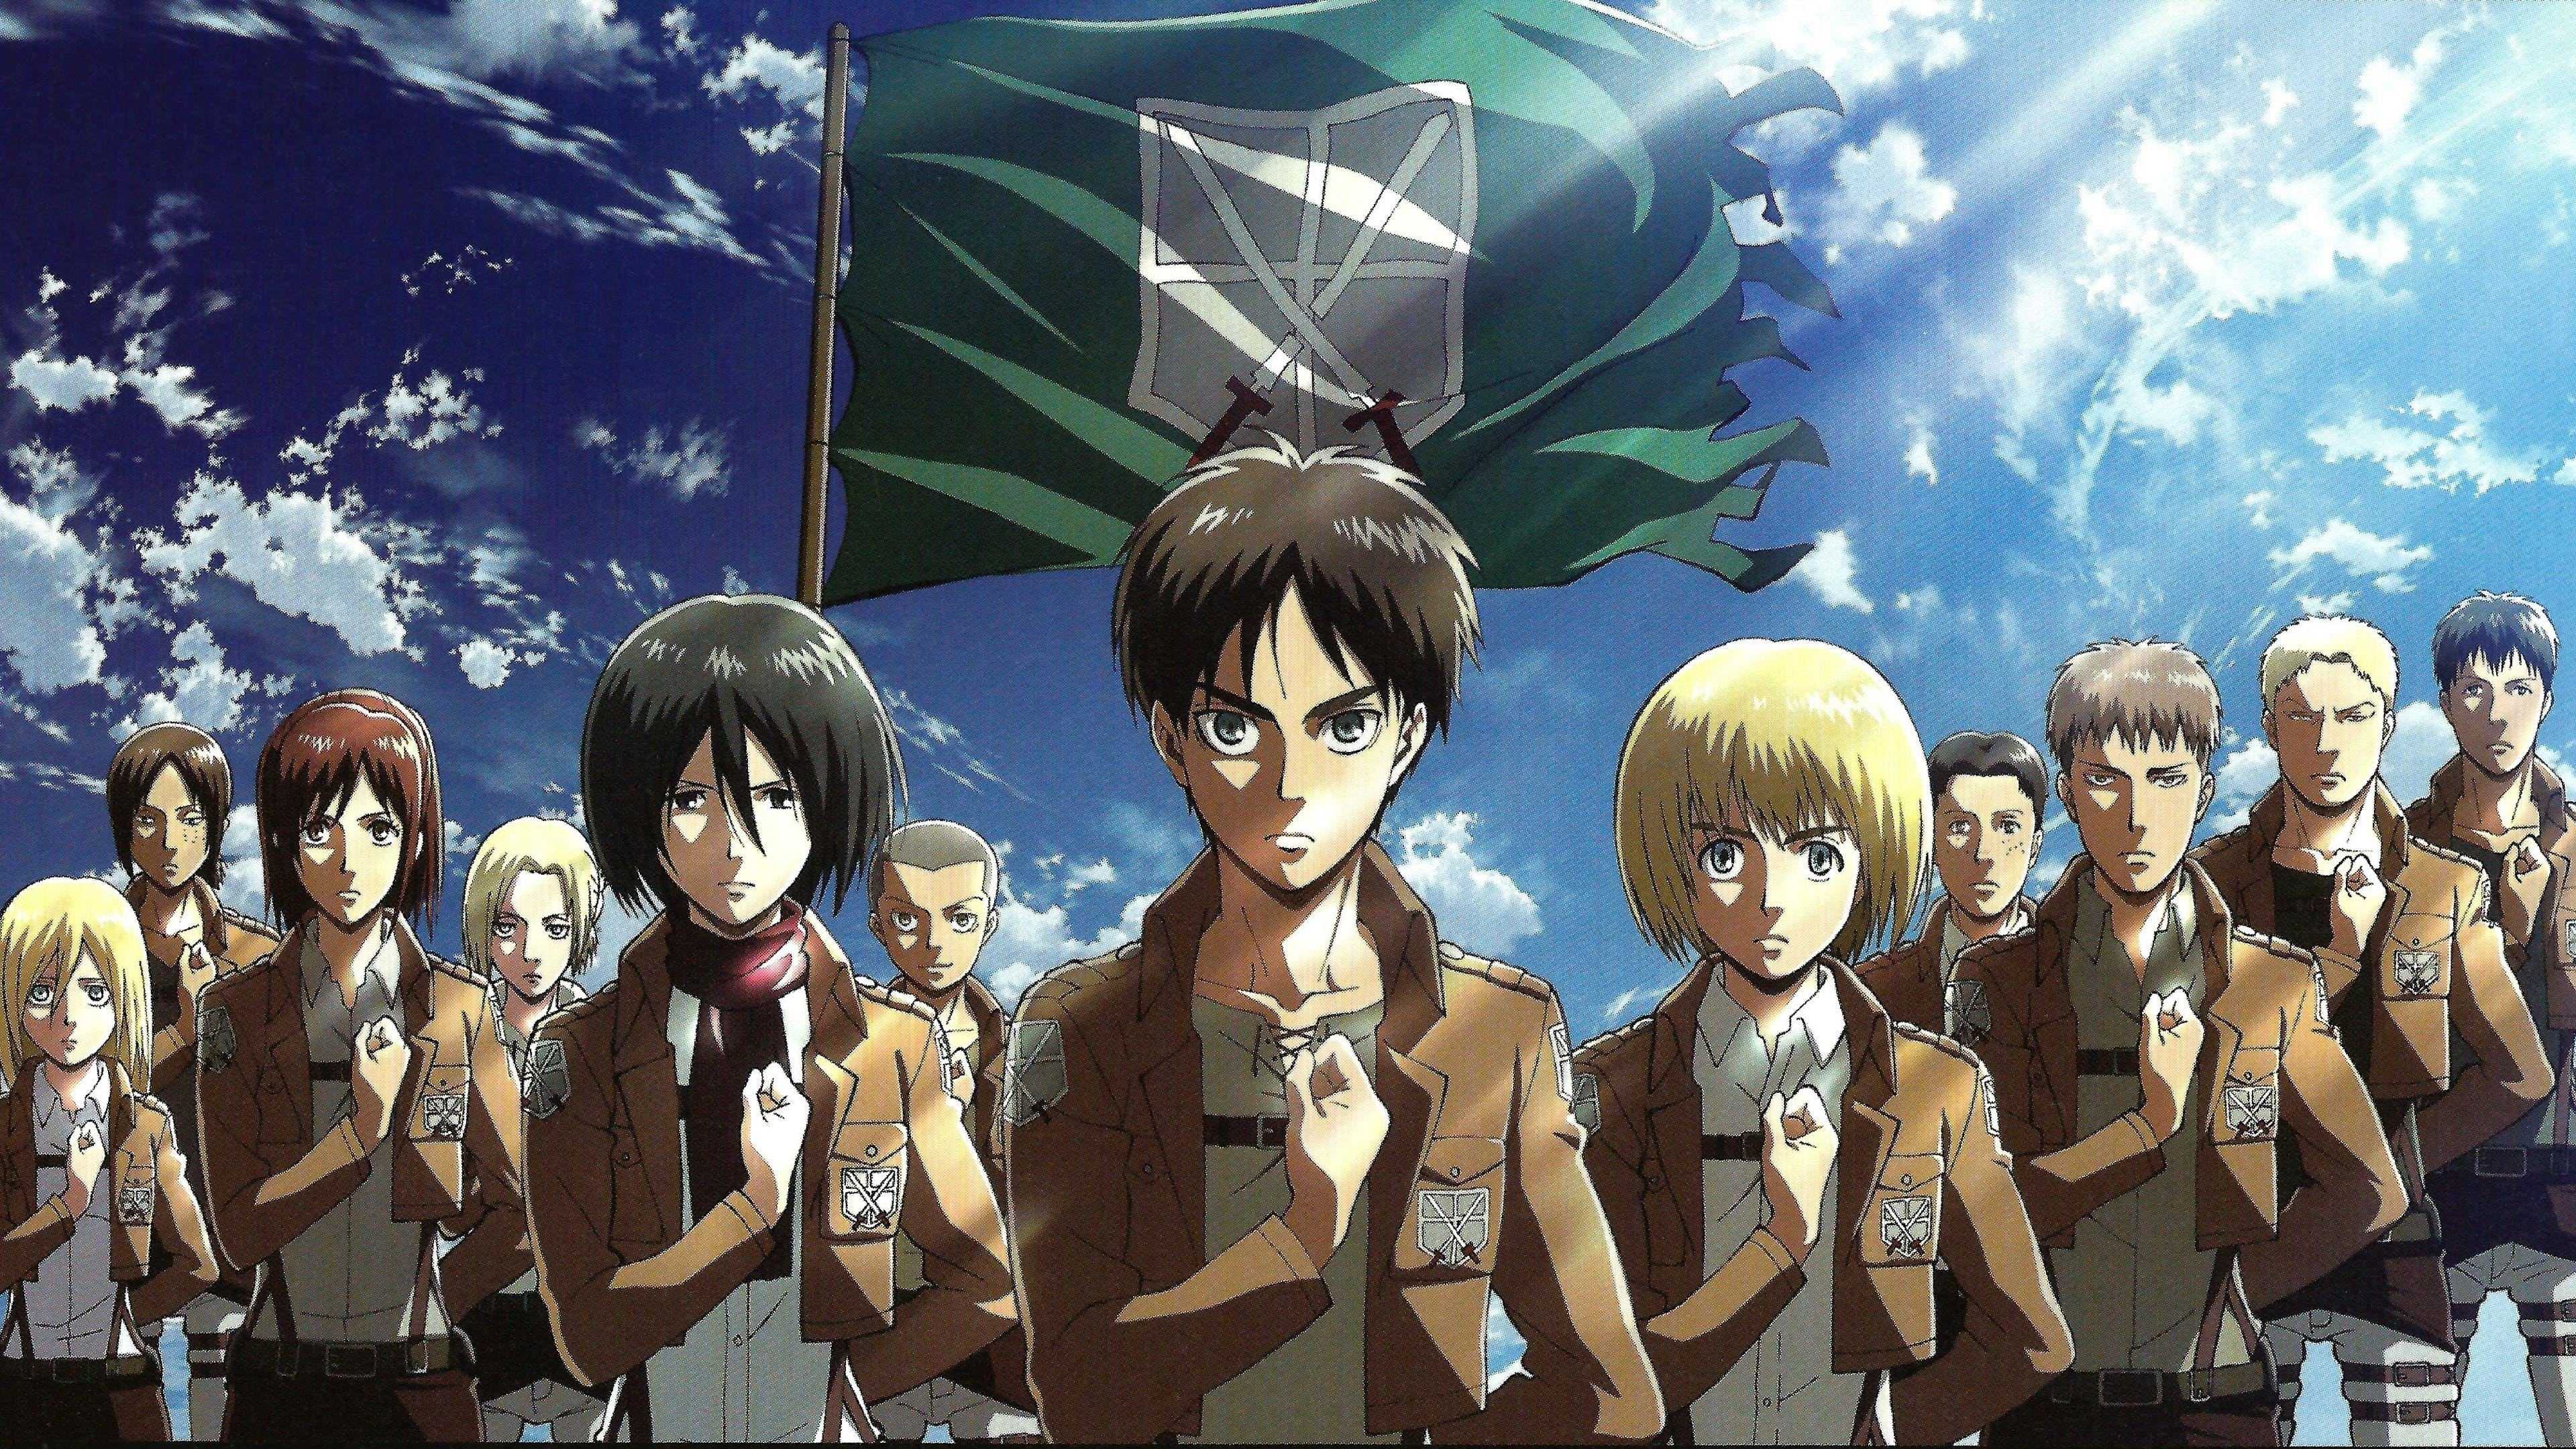 Attack On Titan Eren Yeager Wallpapers